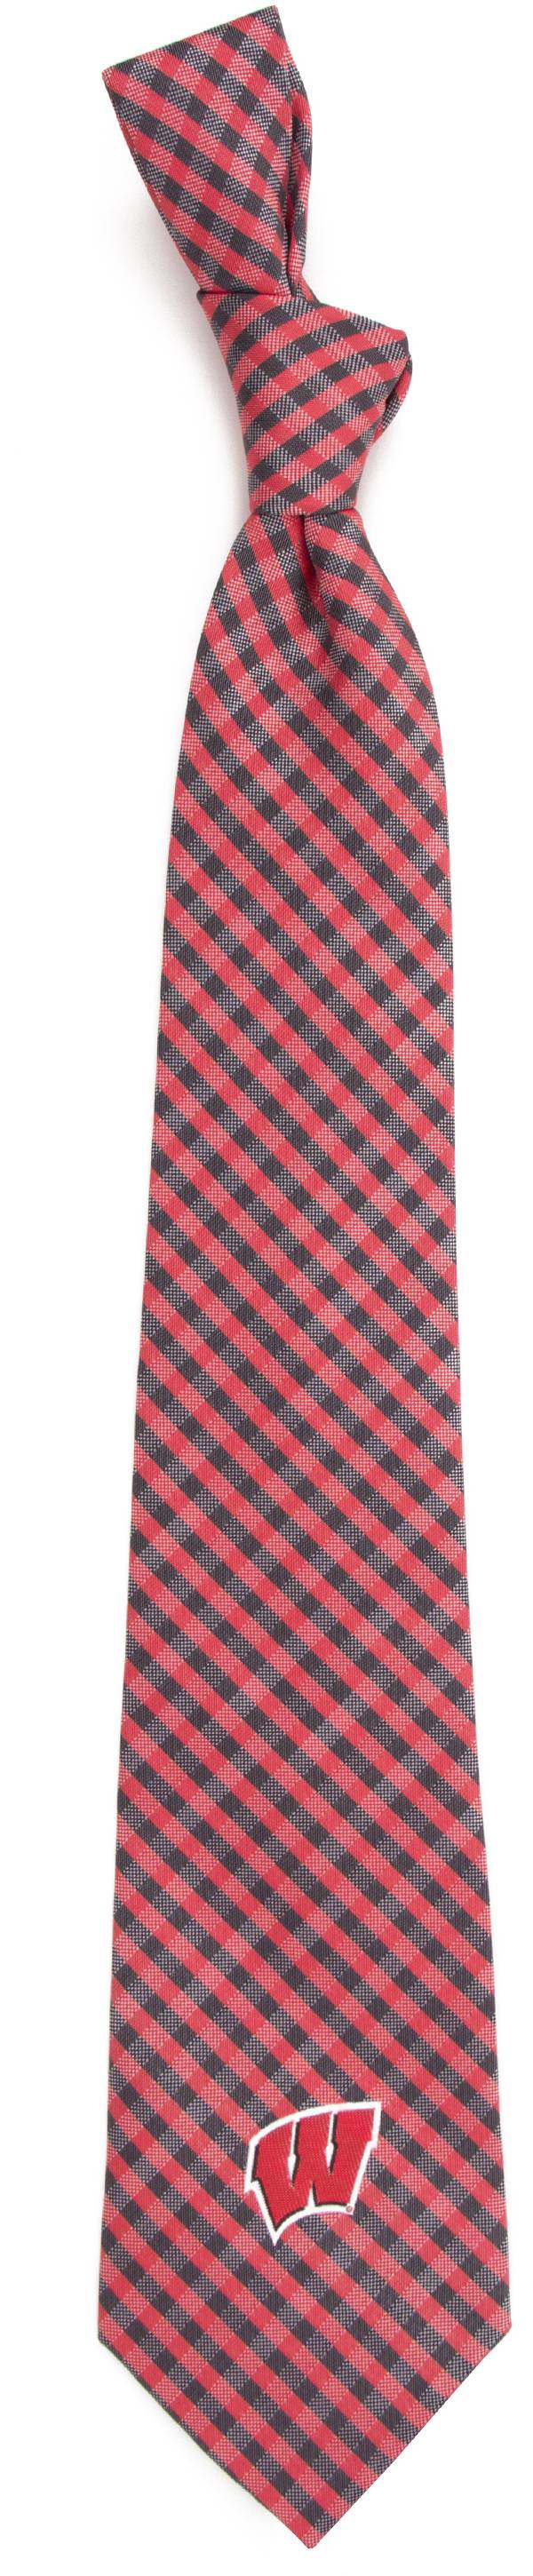 Eagles Wings Wisconsin Badgers Gingham Necktie product image